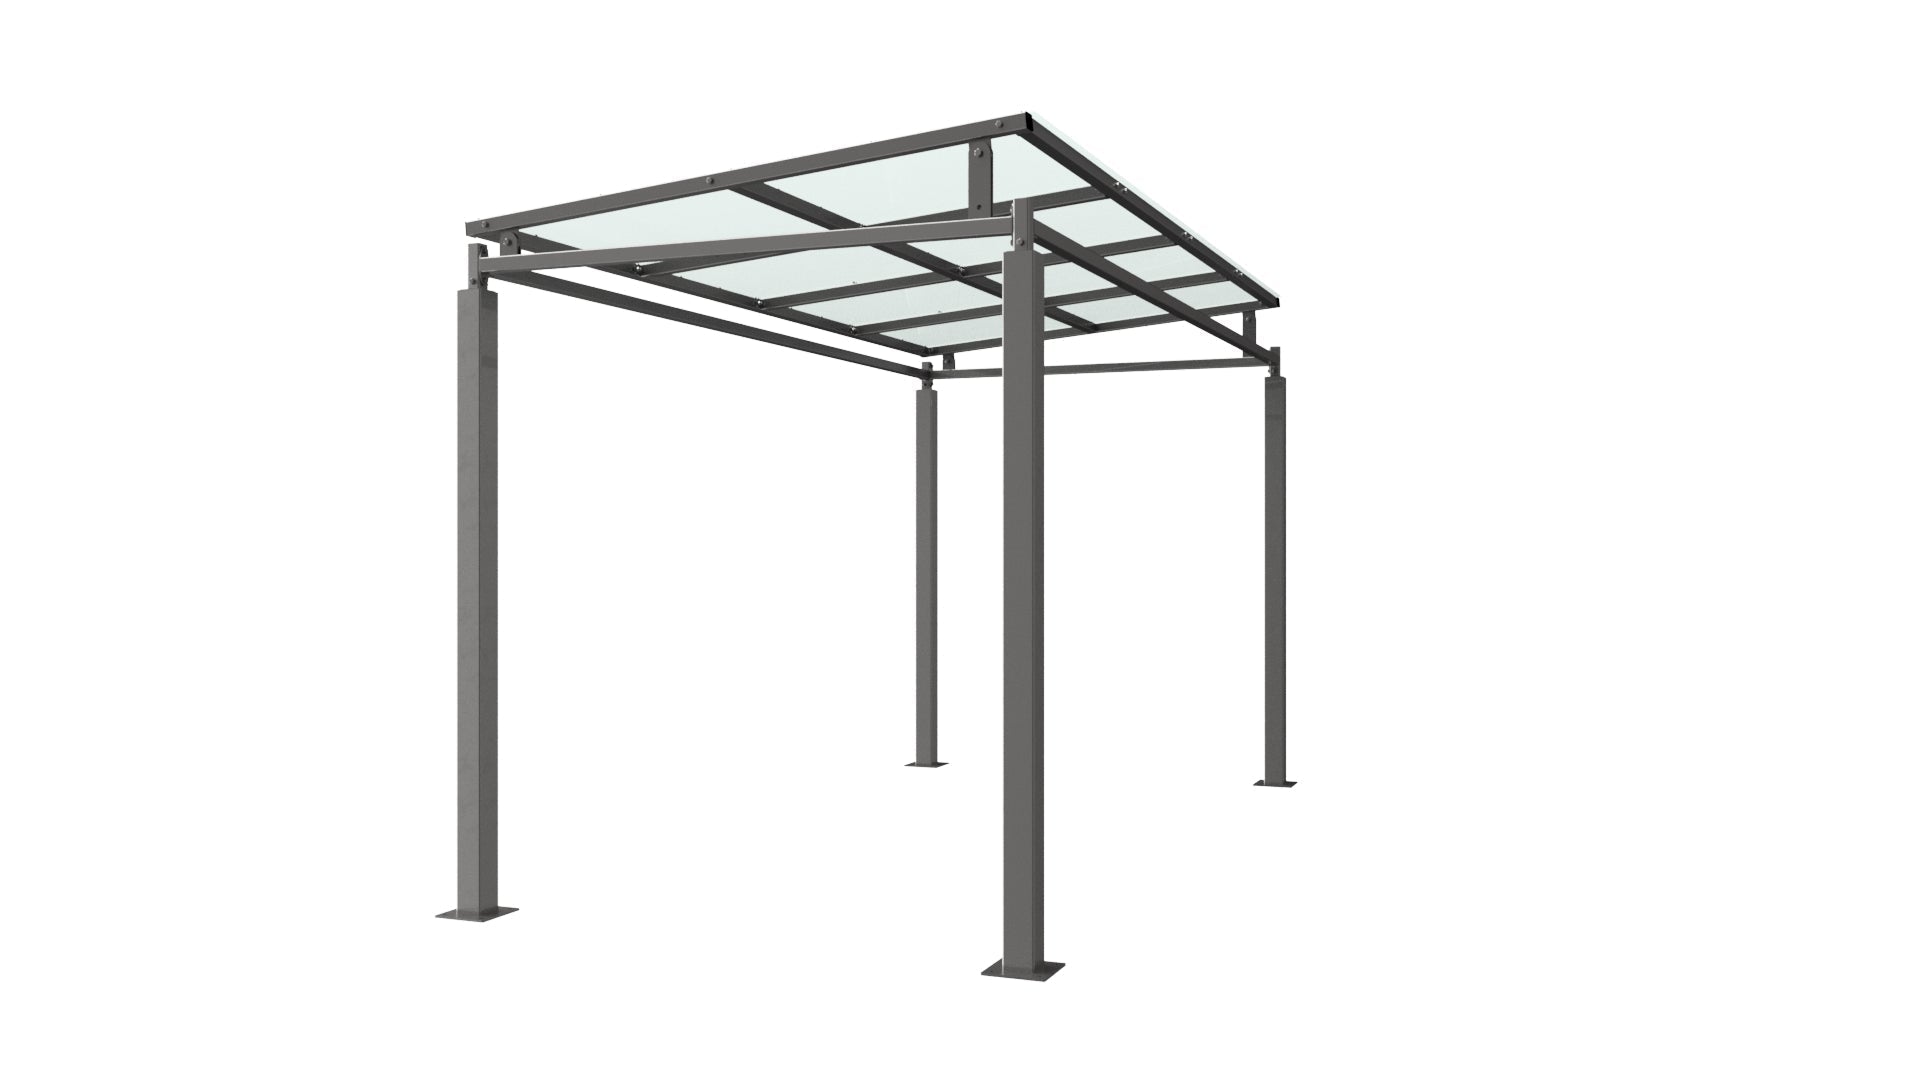 Bedford Cycle/Smoking Shelter Galvanised Steel Frame With PETG Roof